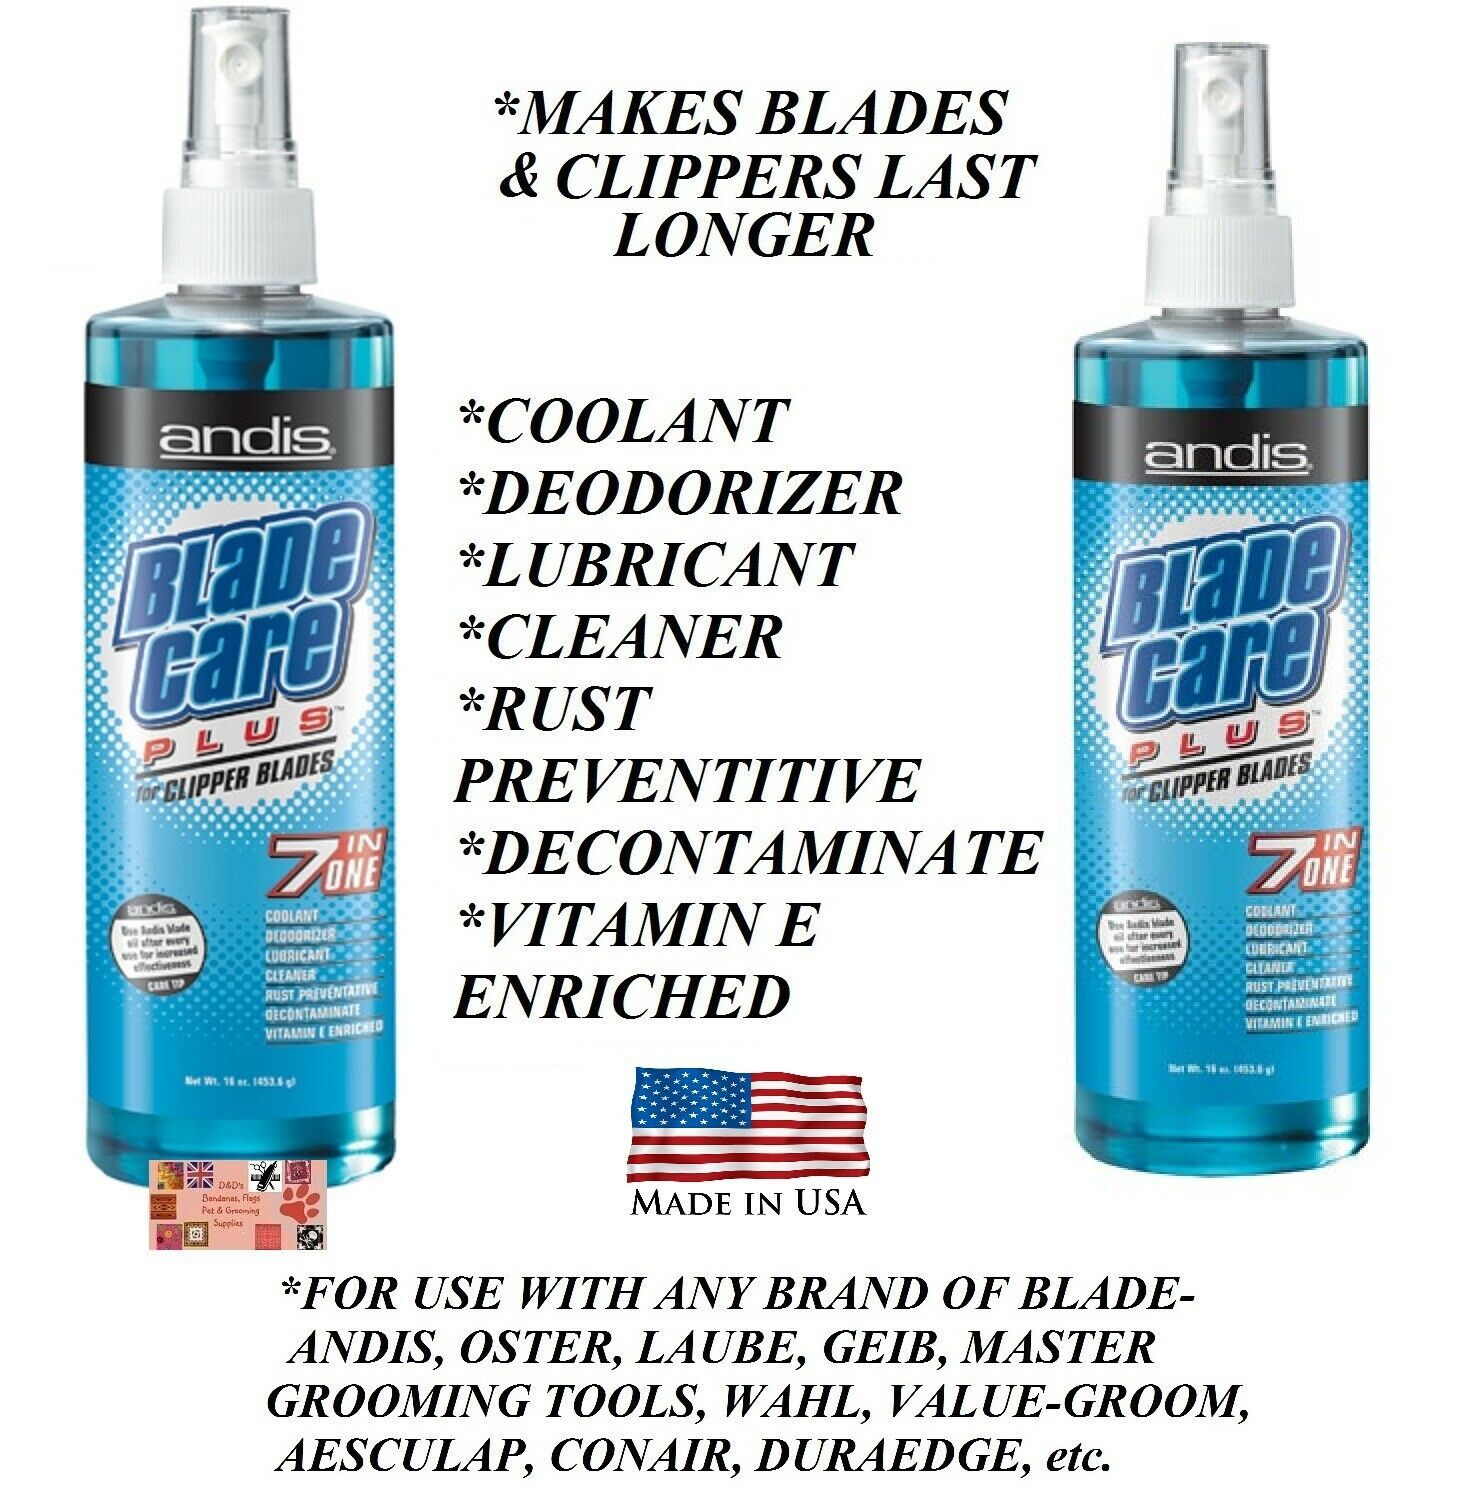 Primary image for 2-ANDIS 7 in 1 CLIPPER BLADE CARE PLUS Spray Cleans,Cools,Disinfects*AG,BG,A5,76